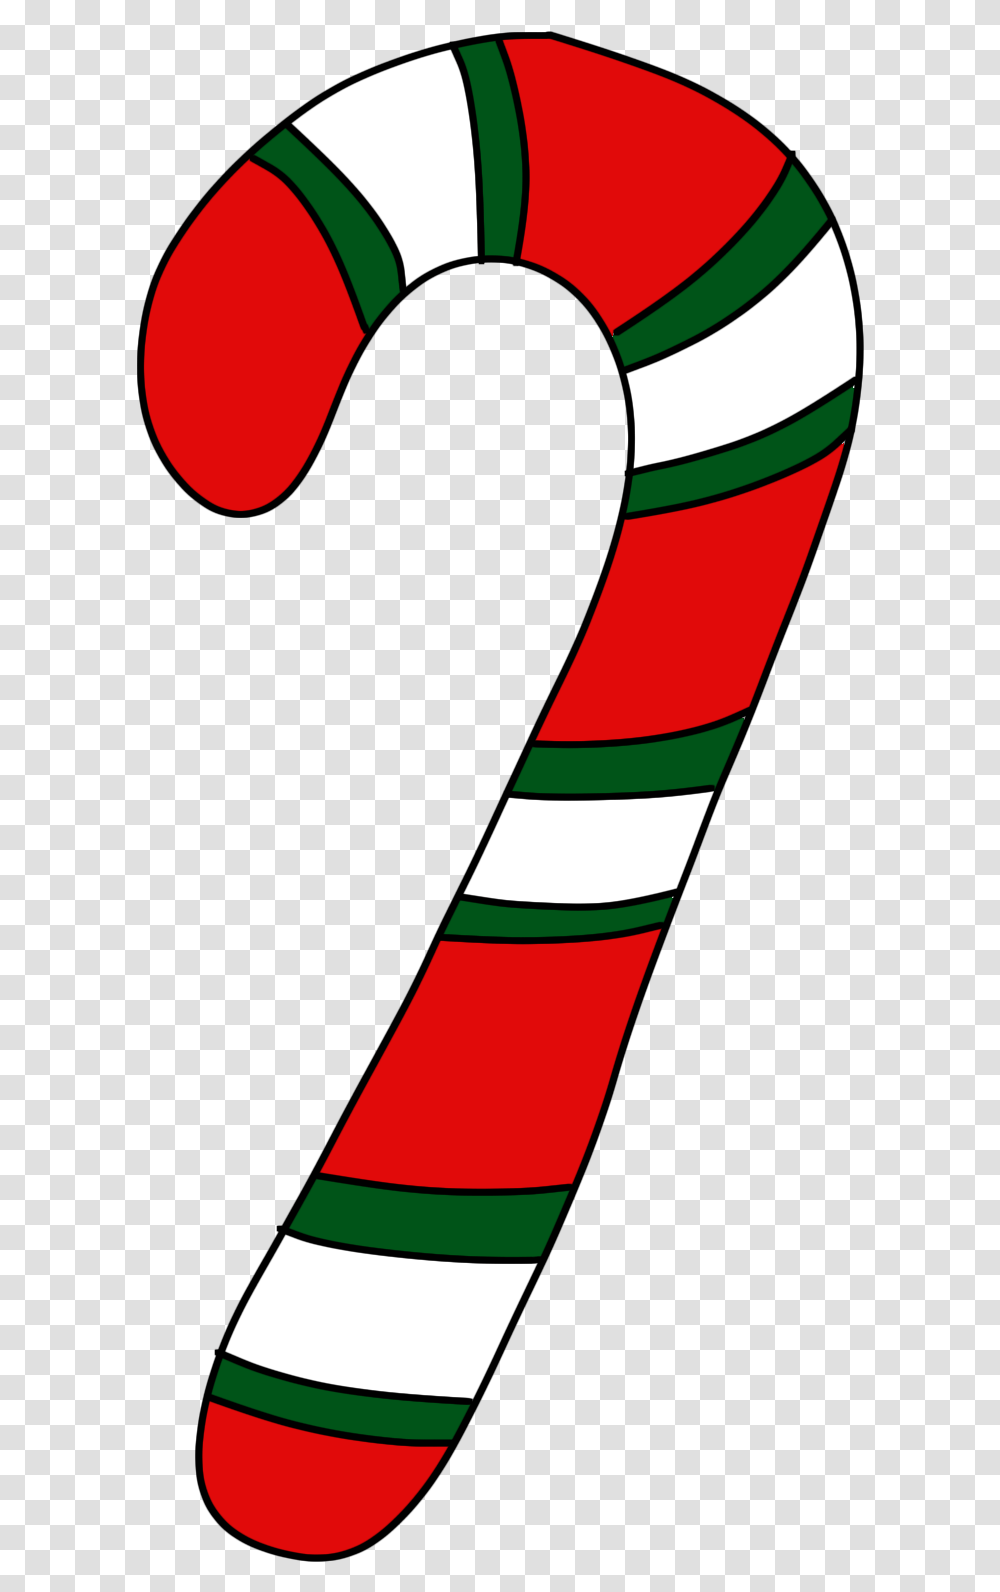 Detail Clipart Of Candy Cane Nomer 9